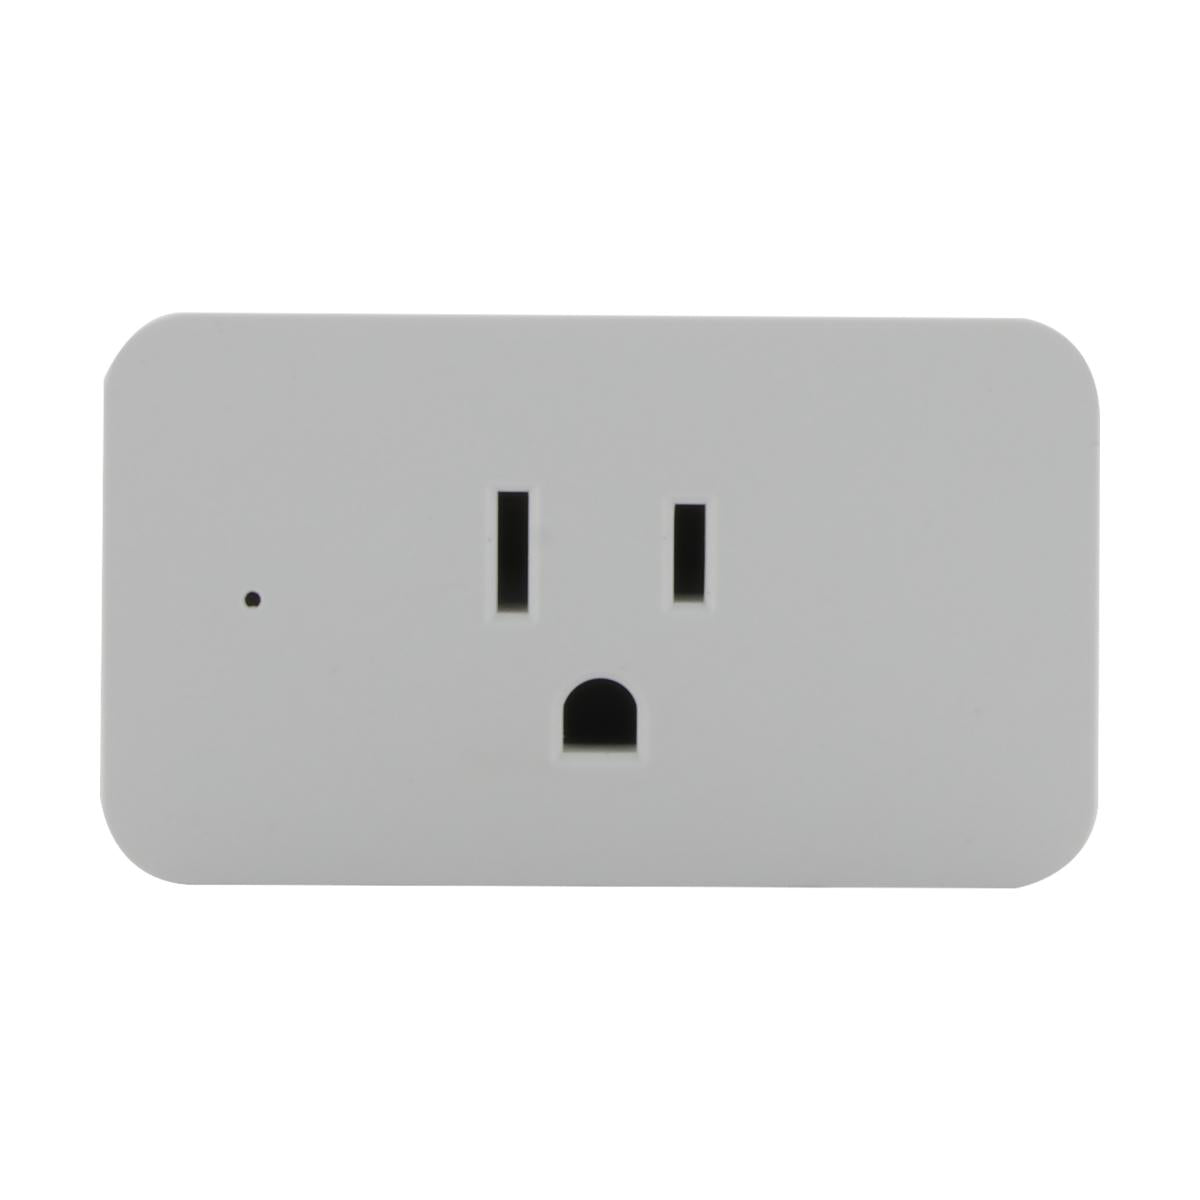 SATCO - STARFISH WIFI SMART PLUG-IN OUTLET- 15 AMP